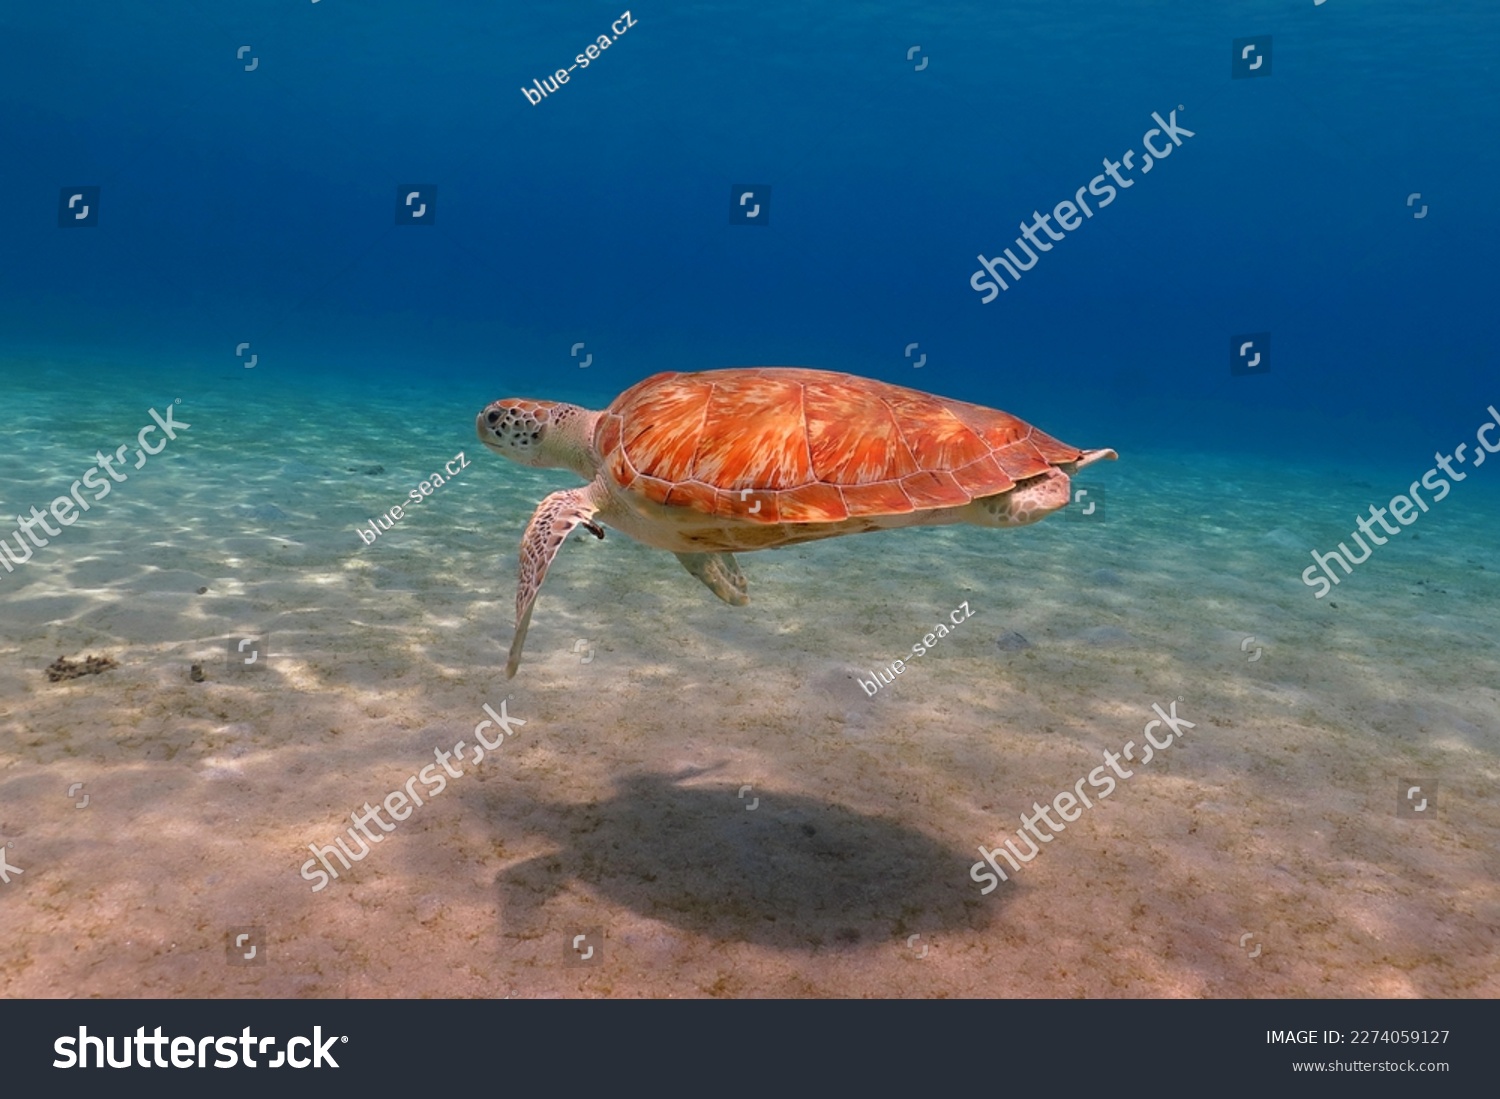 Sea turtle in the shallow vivid blue ocean with sandy seabed. Swimming aquatic wild animal, underwater photography from scuba diving with the sea turtles. Tropical marine life picture. #2274059127